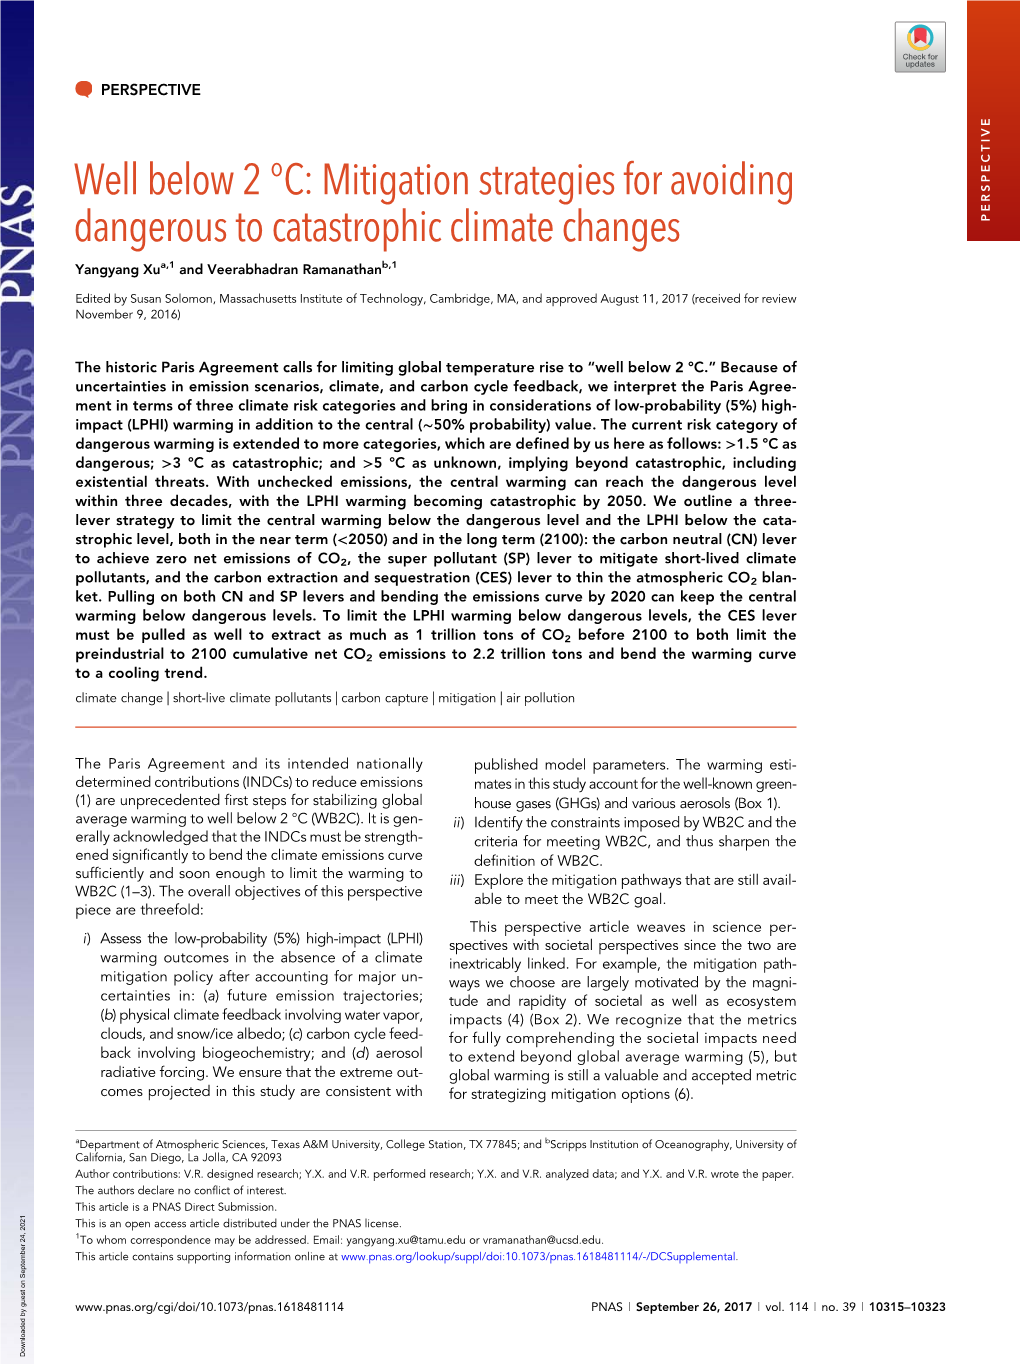 Mitigation Strategies for Avoiding Dangerous to Catastrophic Climate Changes PERSPECTIVE Yangyang Xua,1 and Veerabhadran Ramanathanb,1